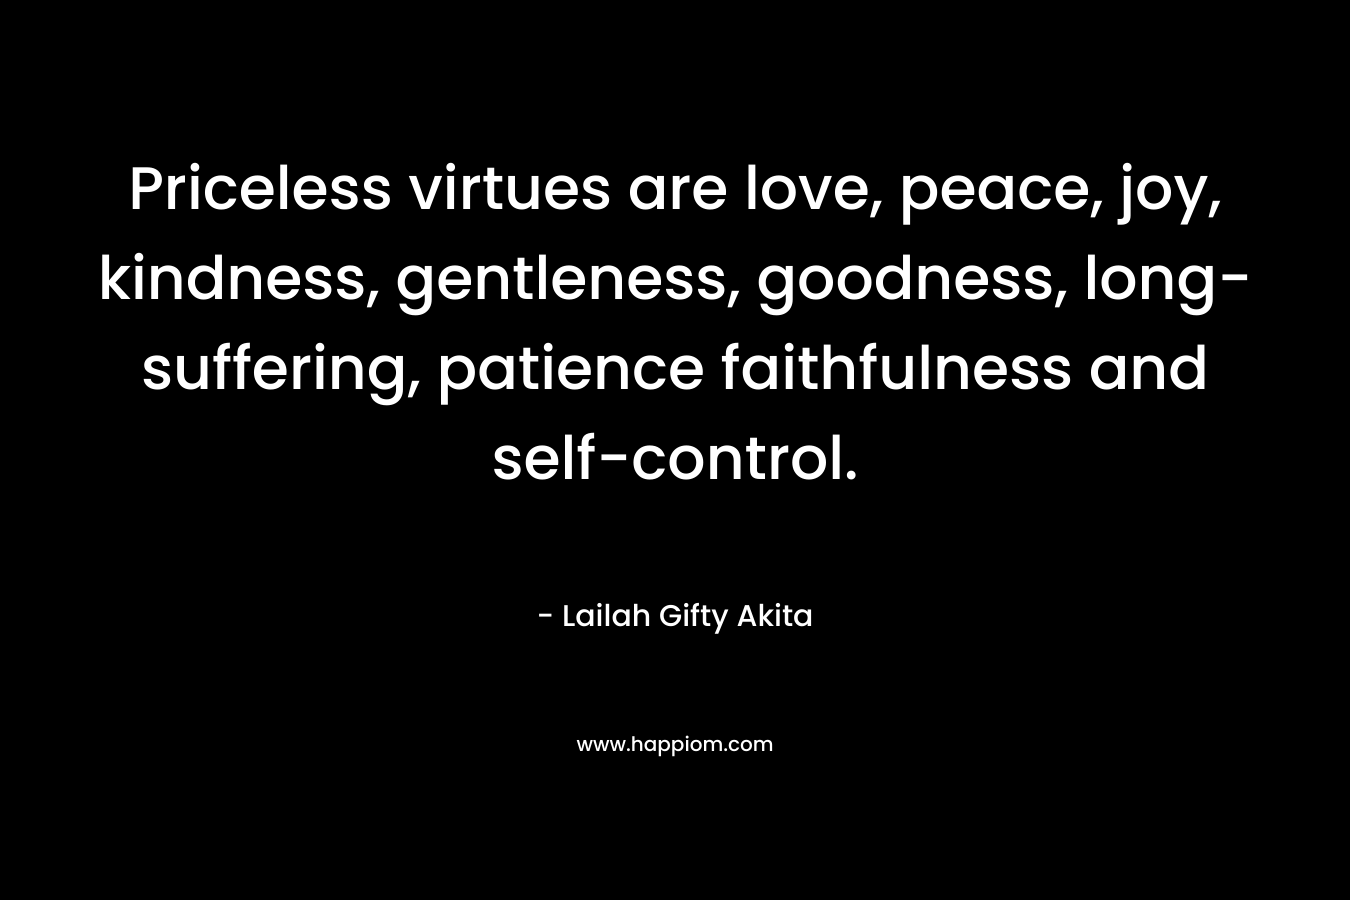 Priceless virtues are love, peace, joy, kindness, gentleness, goodness, long-suffering, patience faithfulness and self-control. – Lailah Gifty Akita